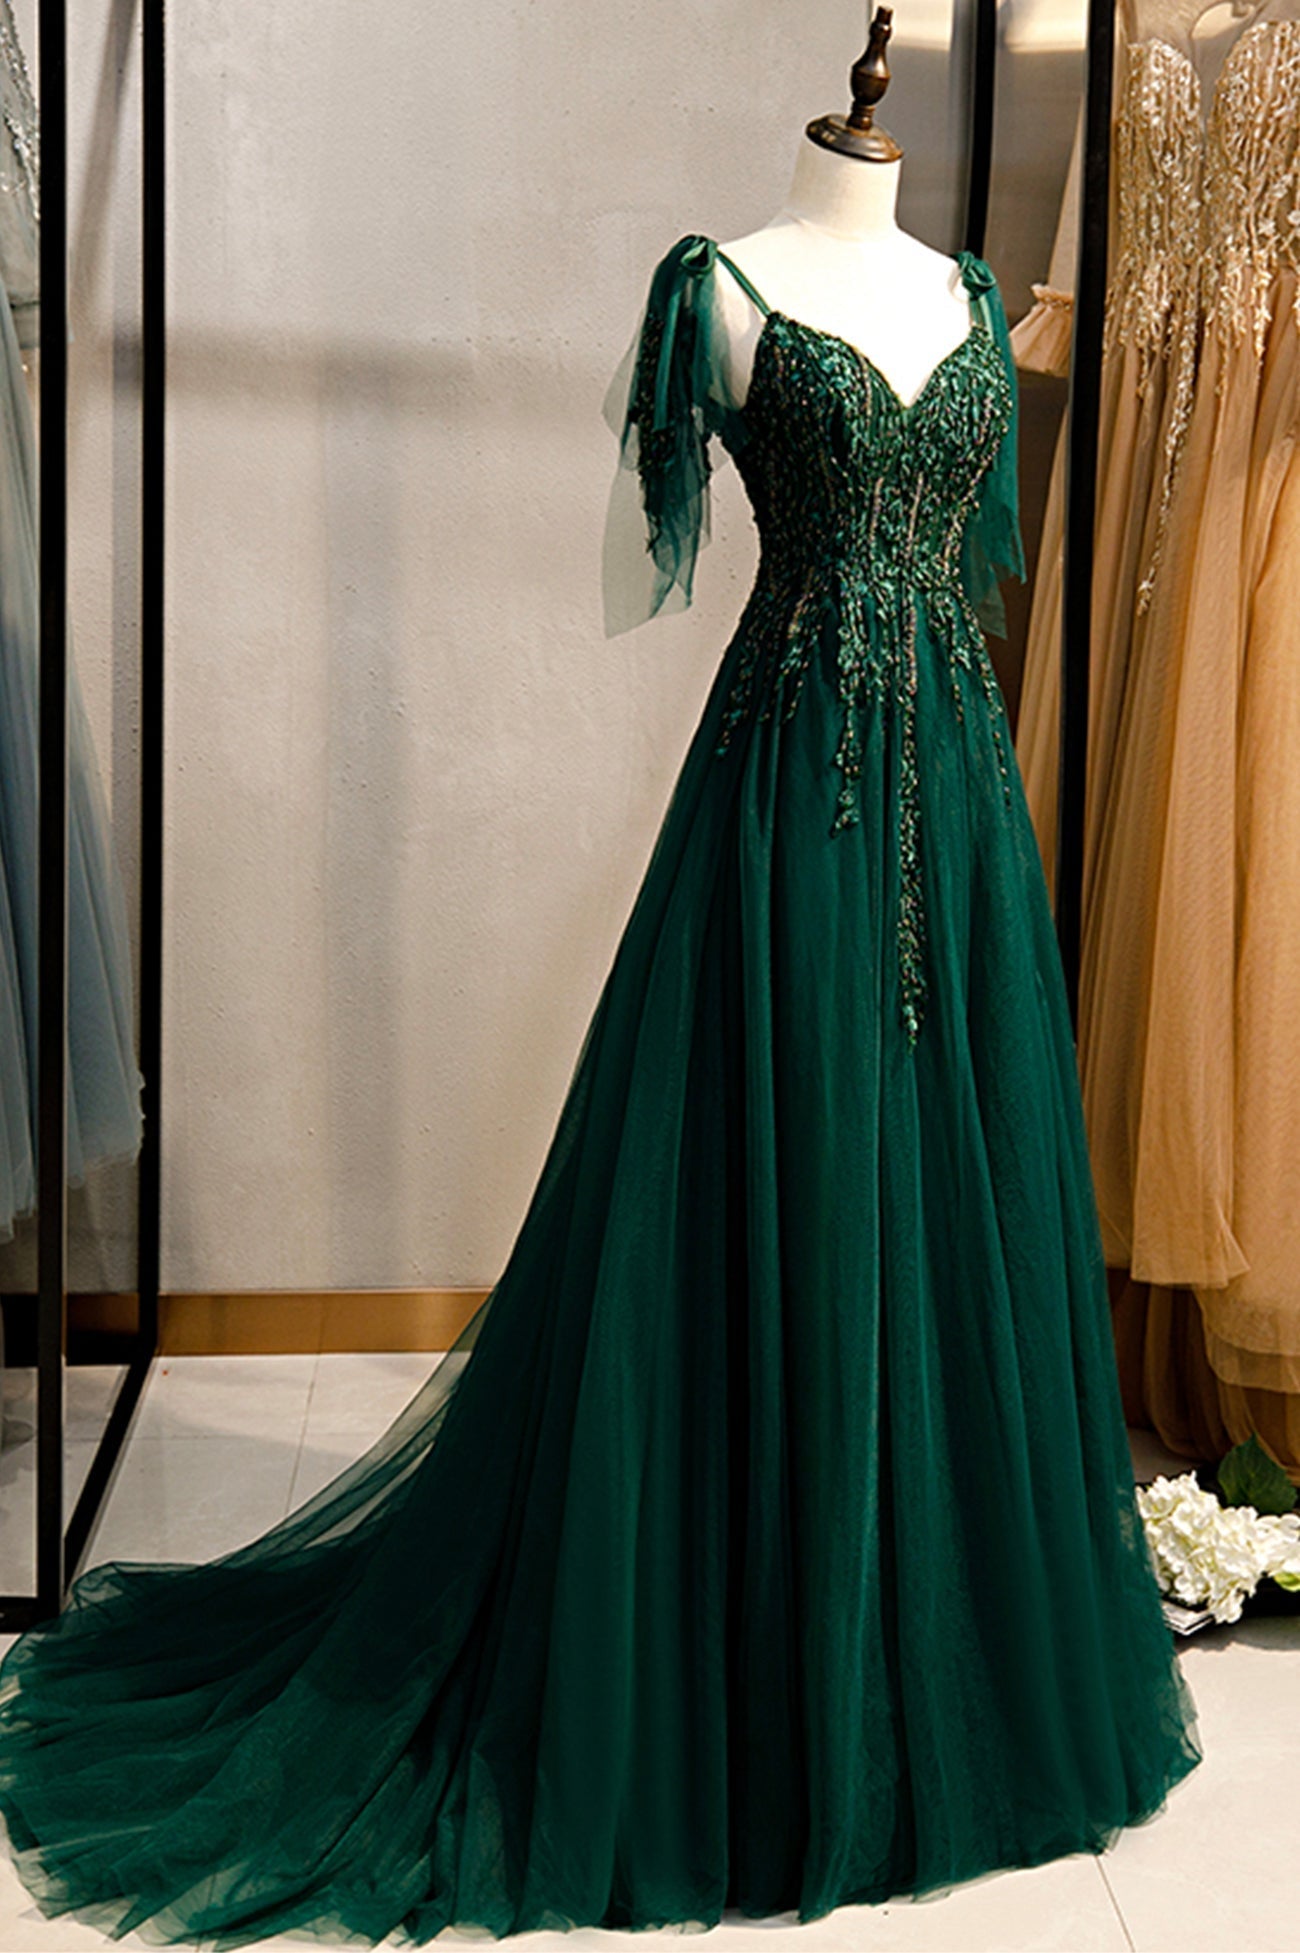 Green V-Neck Lace Long Corset Prom Dresses, A-Line Evening Dresses outfit, Prom Dress Tight Fitting